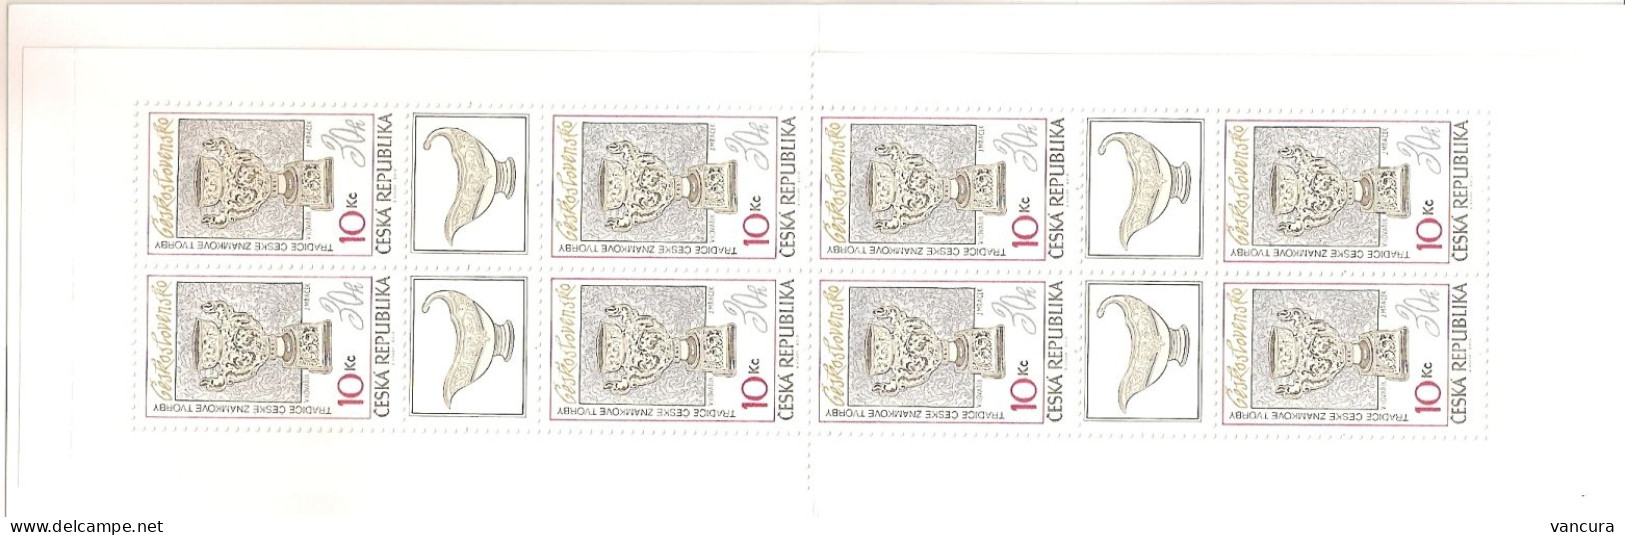 Booklet 619 Czech Republic Traditions Of The Czech Stamp Design 2010 Stamps On Stamps - Porcelain